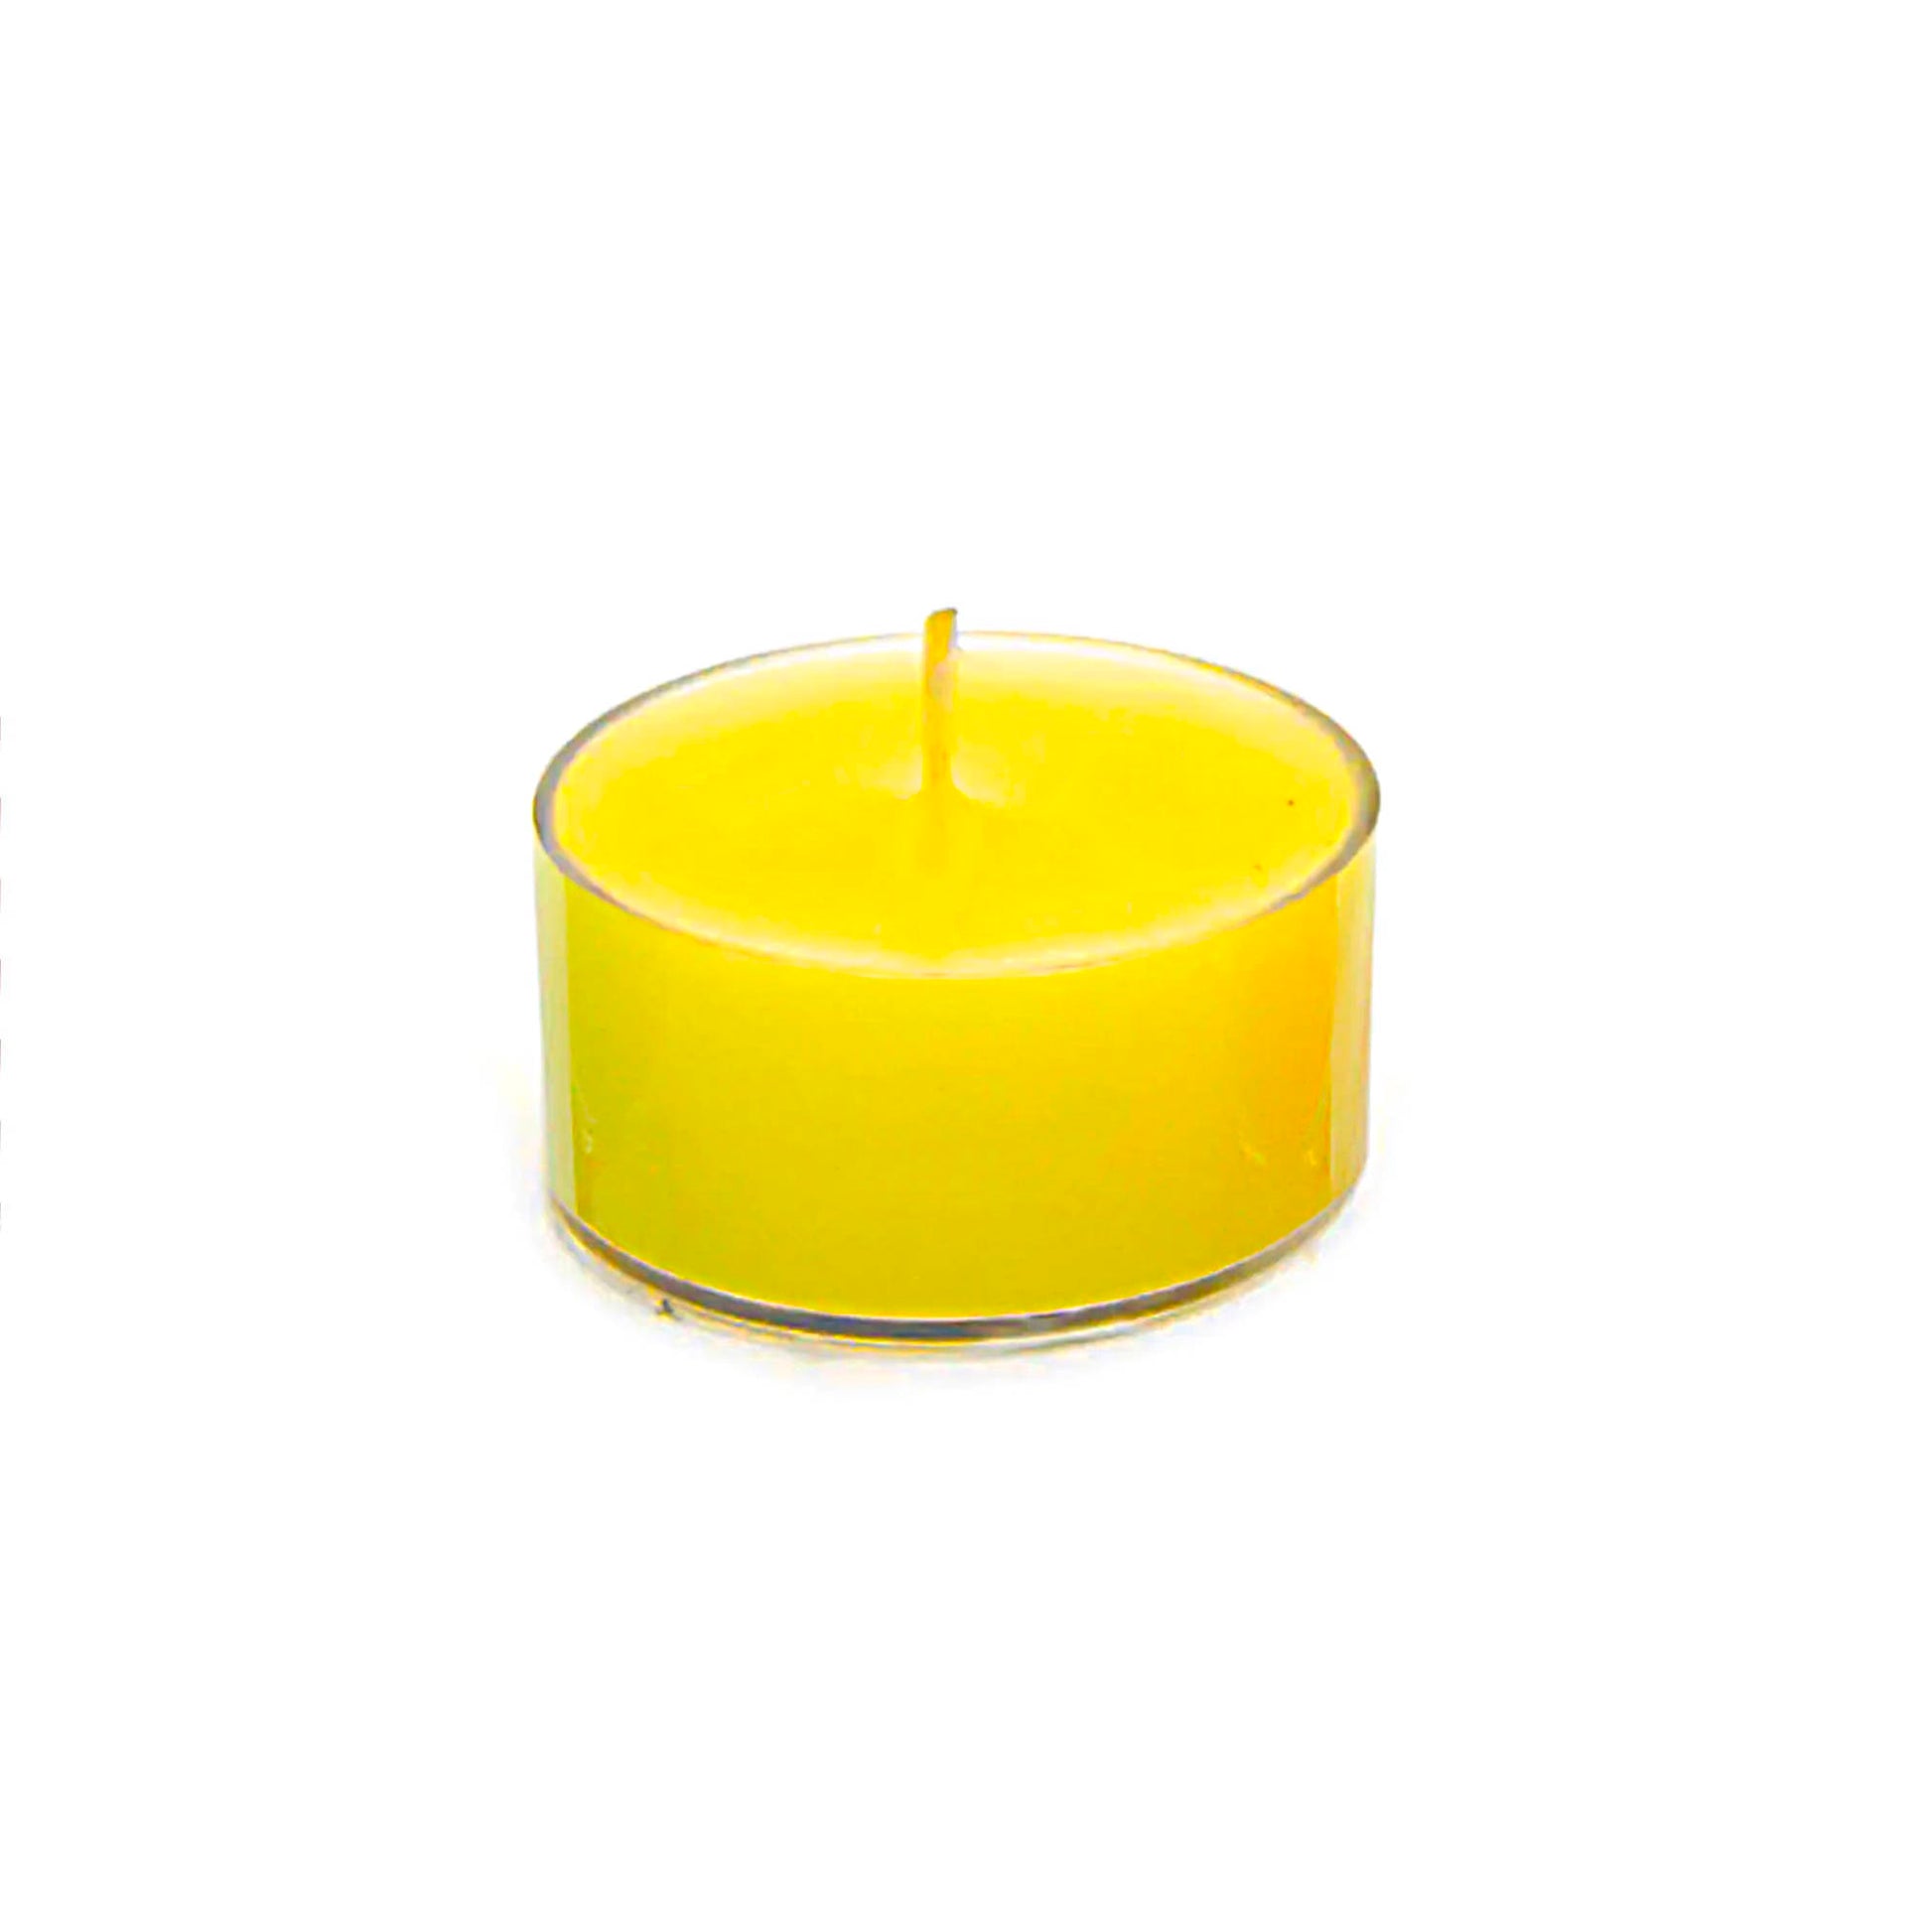 Sunflower Tealights Scented Candle